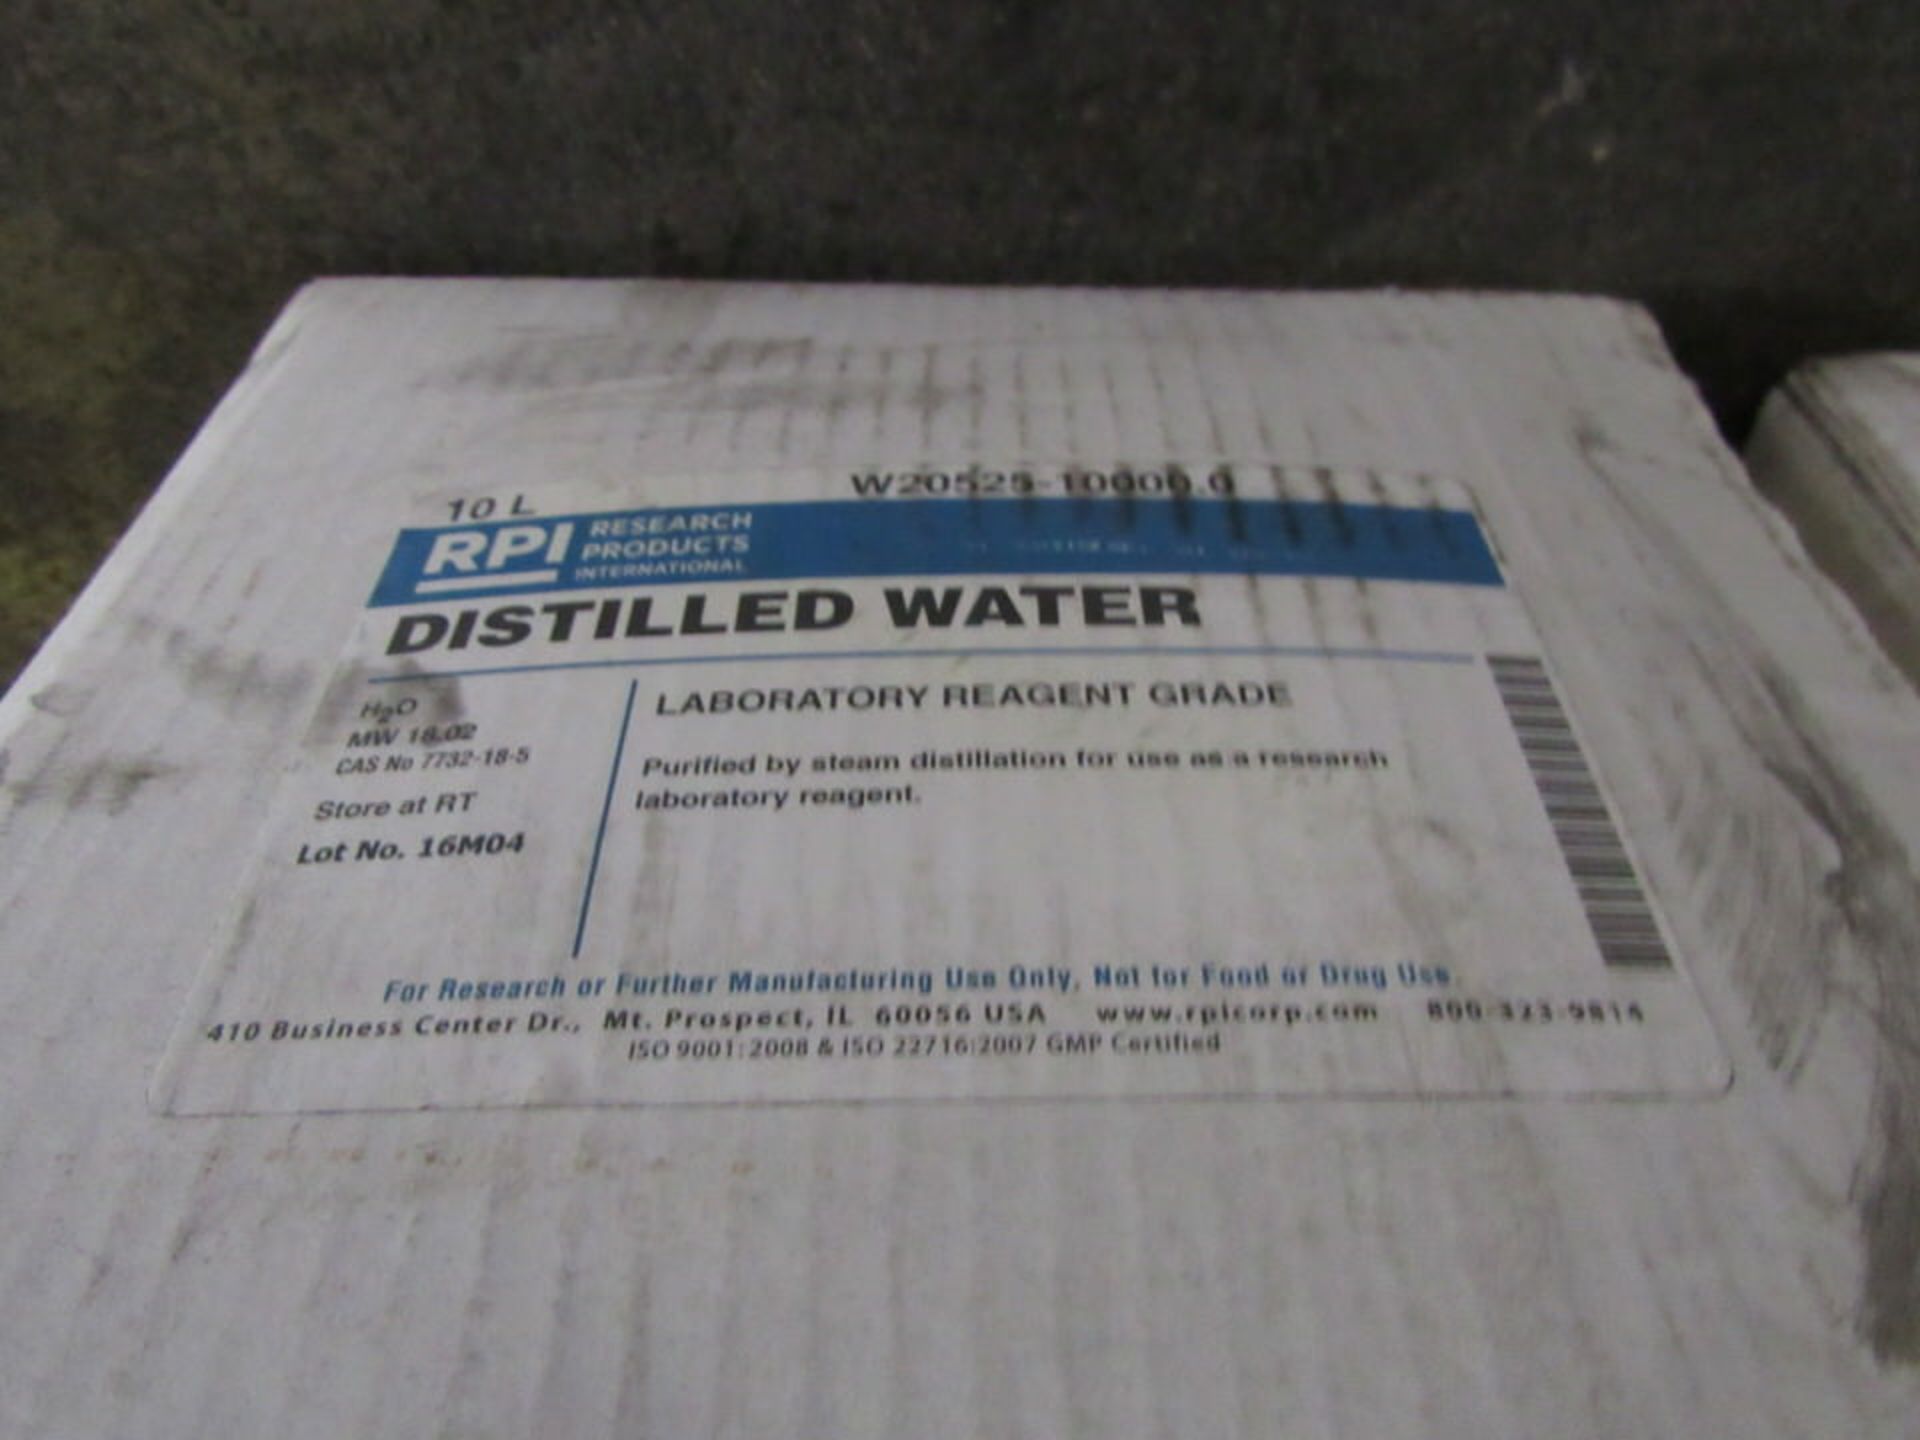 Lot of 3 2.5 Gallon Bottles of Distilled Water - Image 2 of 2